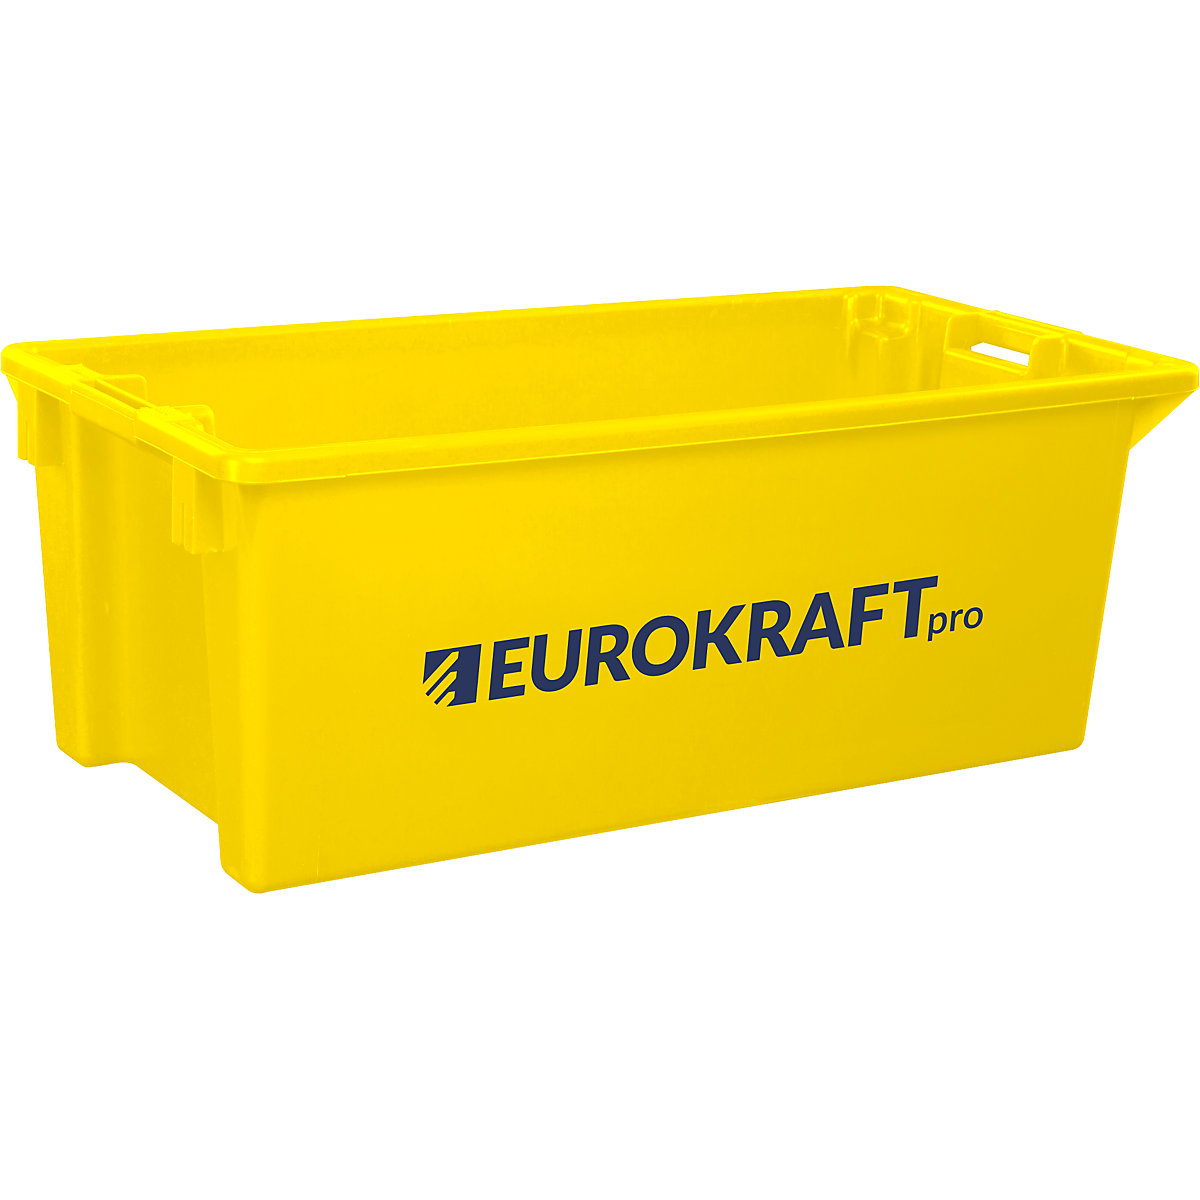 EUROKRAFTpro – Stack/nest container made of polypropylene suitable for foodstuffs, 13 l capacity, pack of 4, solid walls and base, yellow